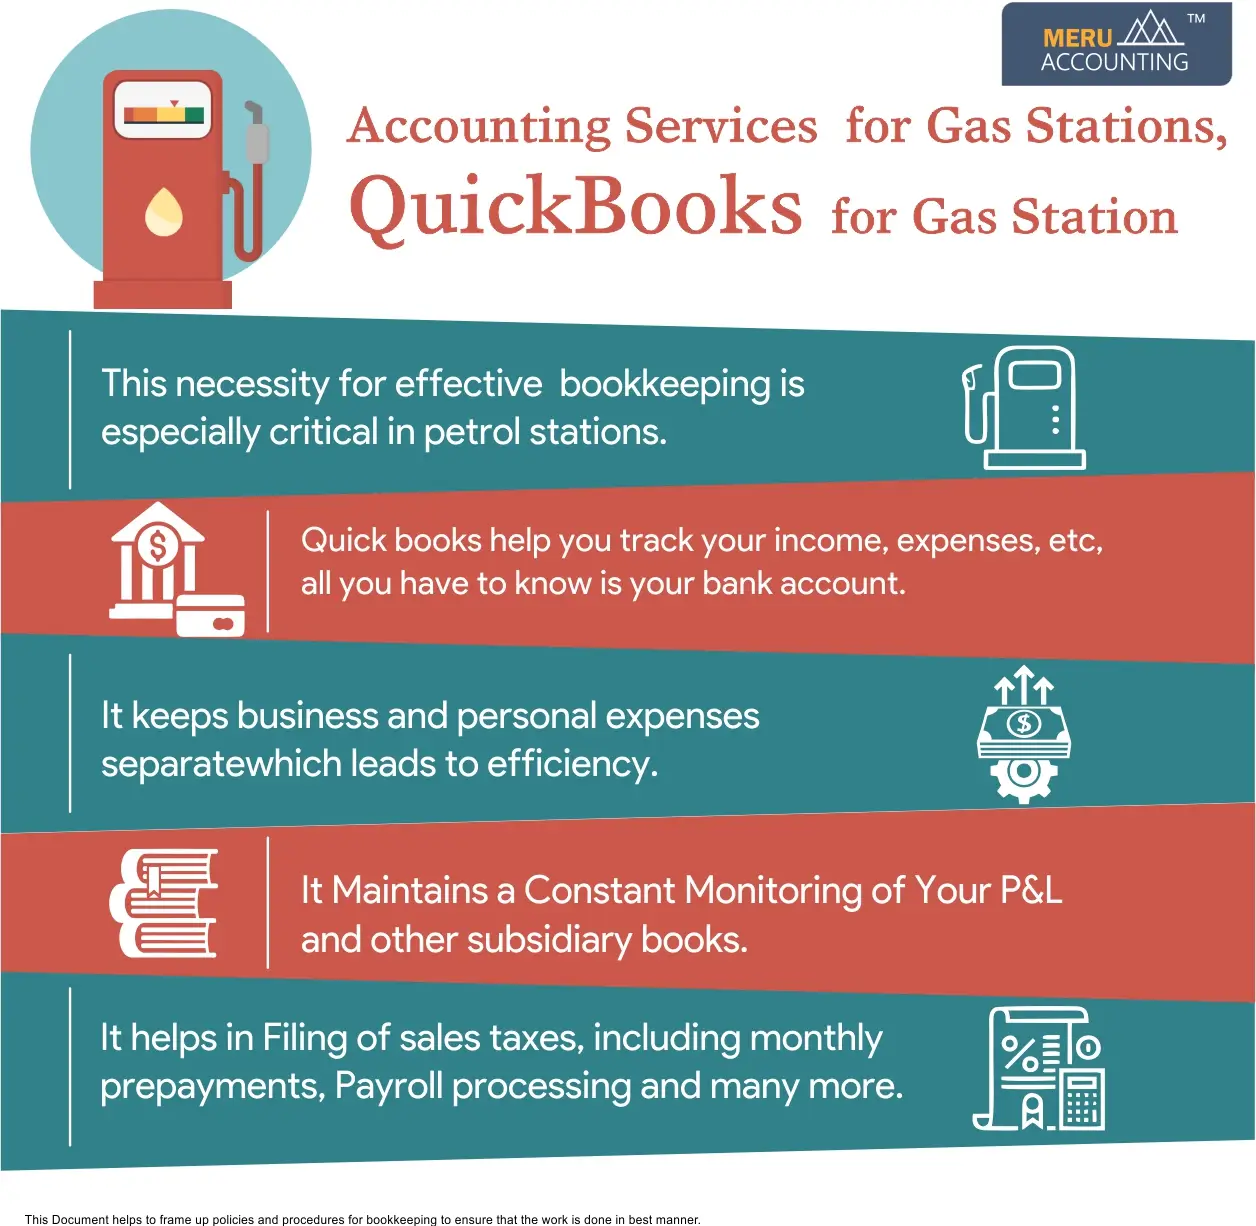 Accounting for Gas Stations